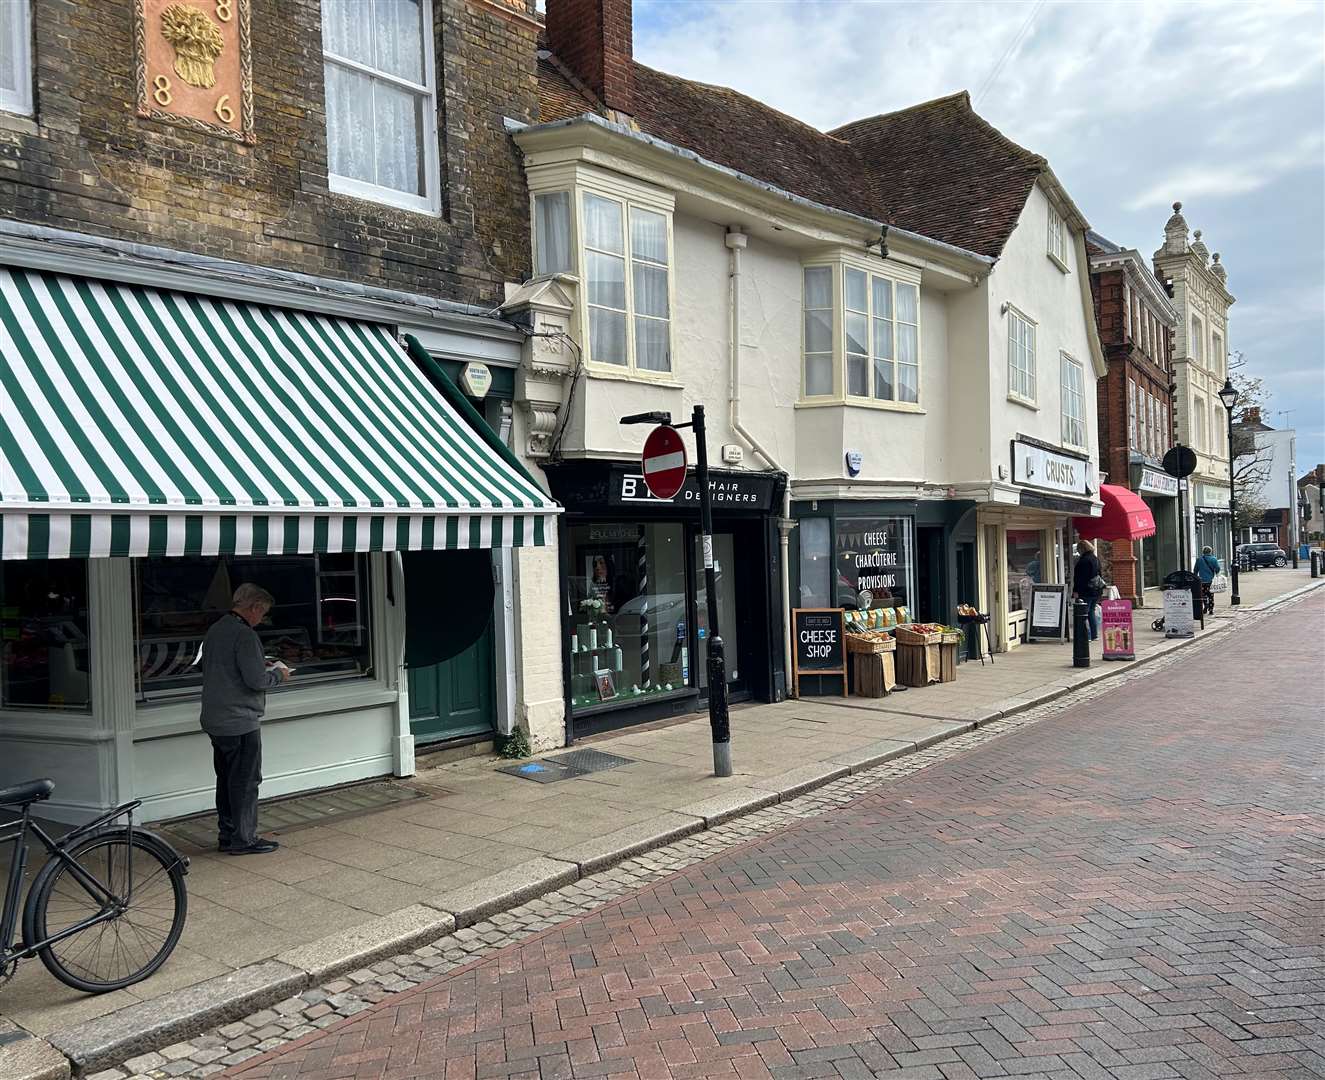 The parade of shops where East Street Deli is based in Faversham